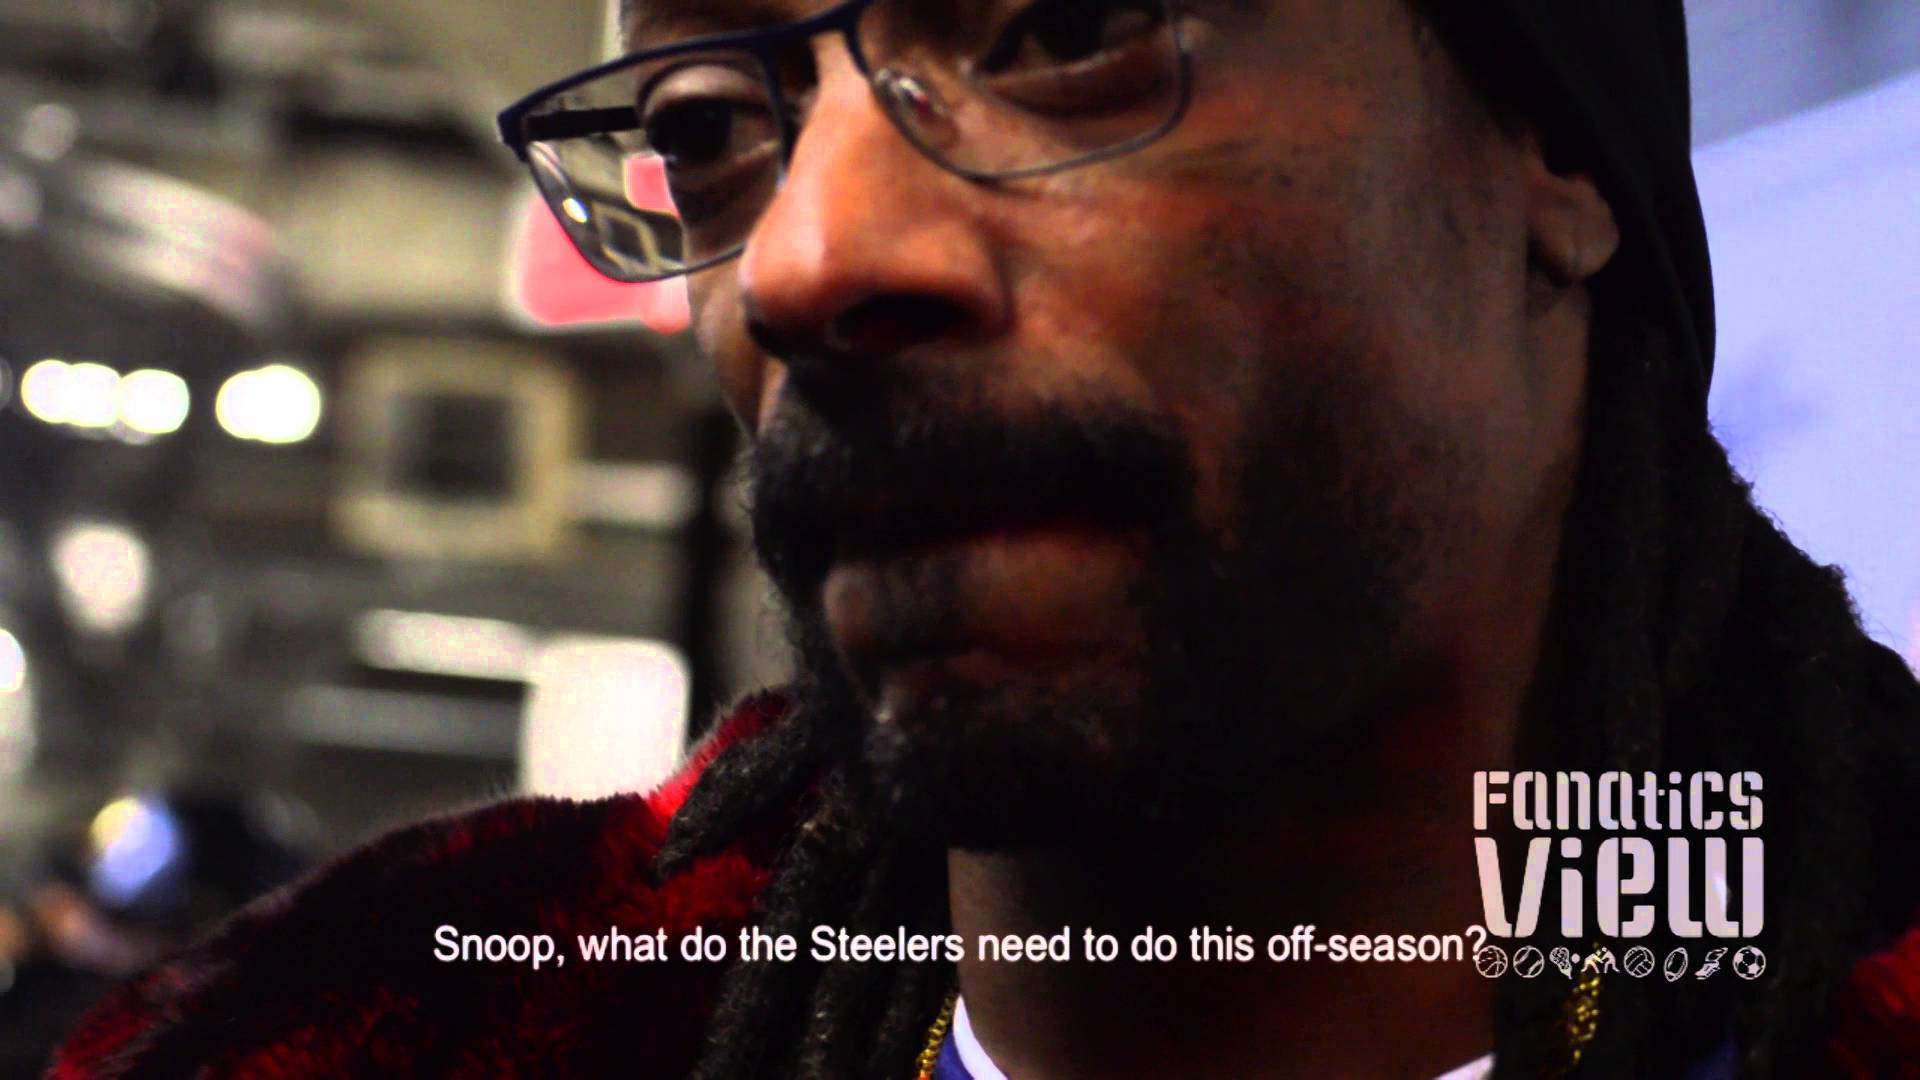 FV Exclusive: Snoop Dogg says the Pittsburgh Steelers need to hire him